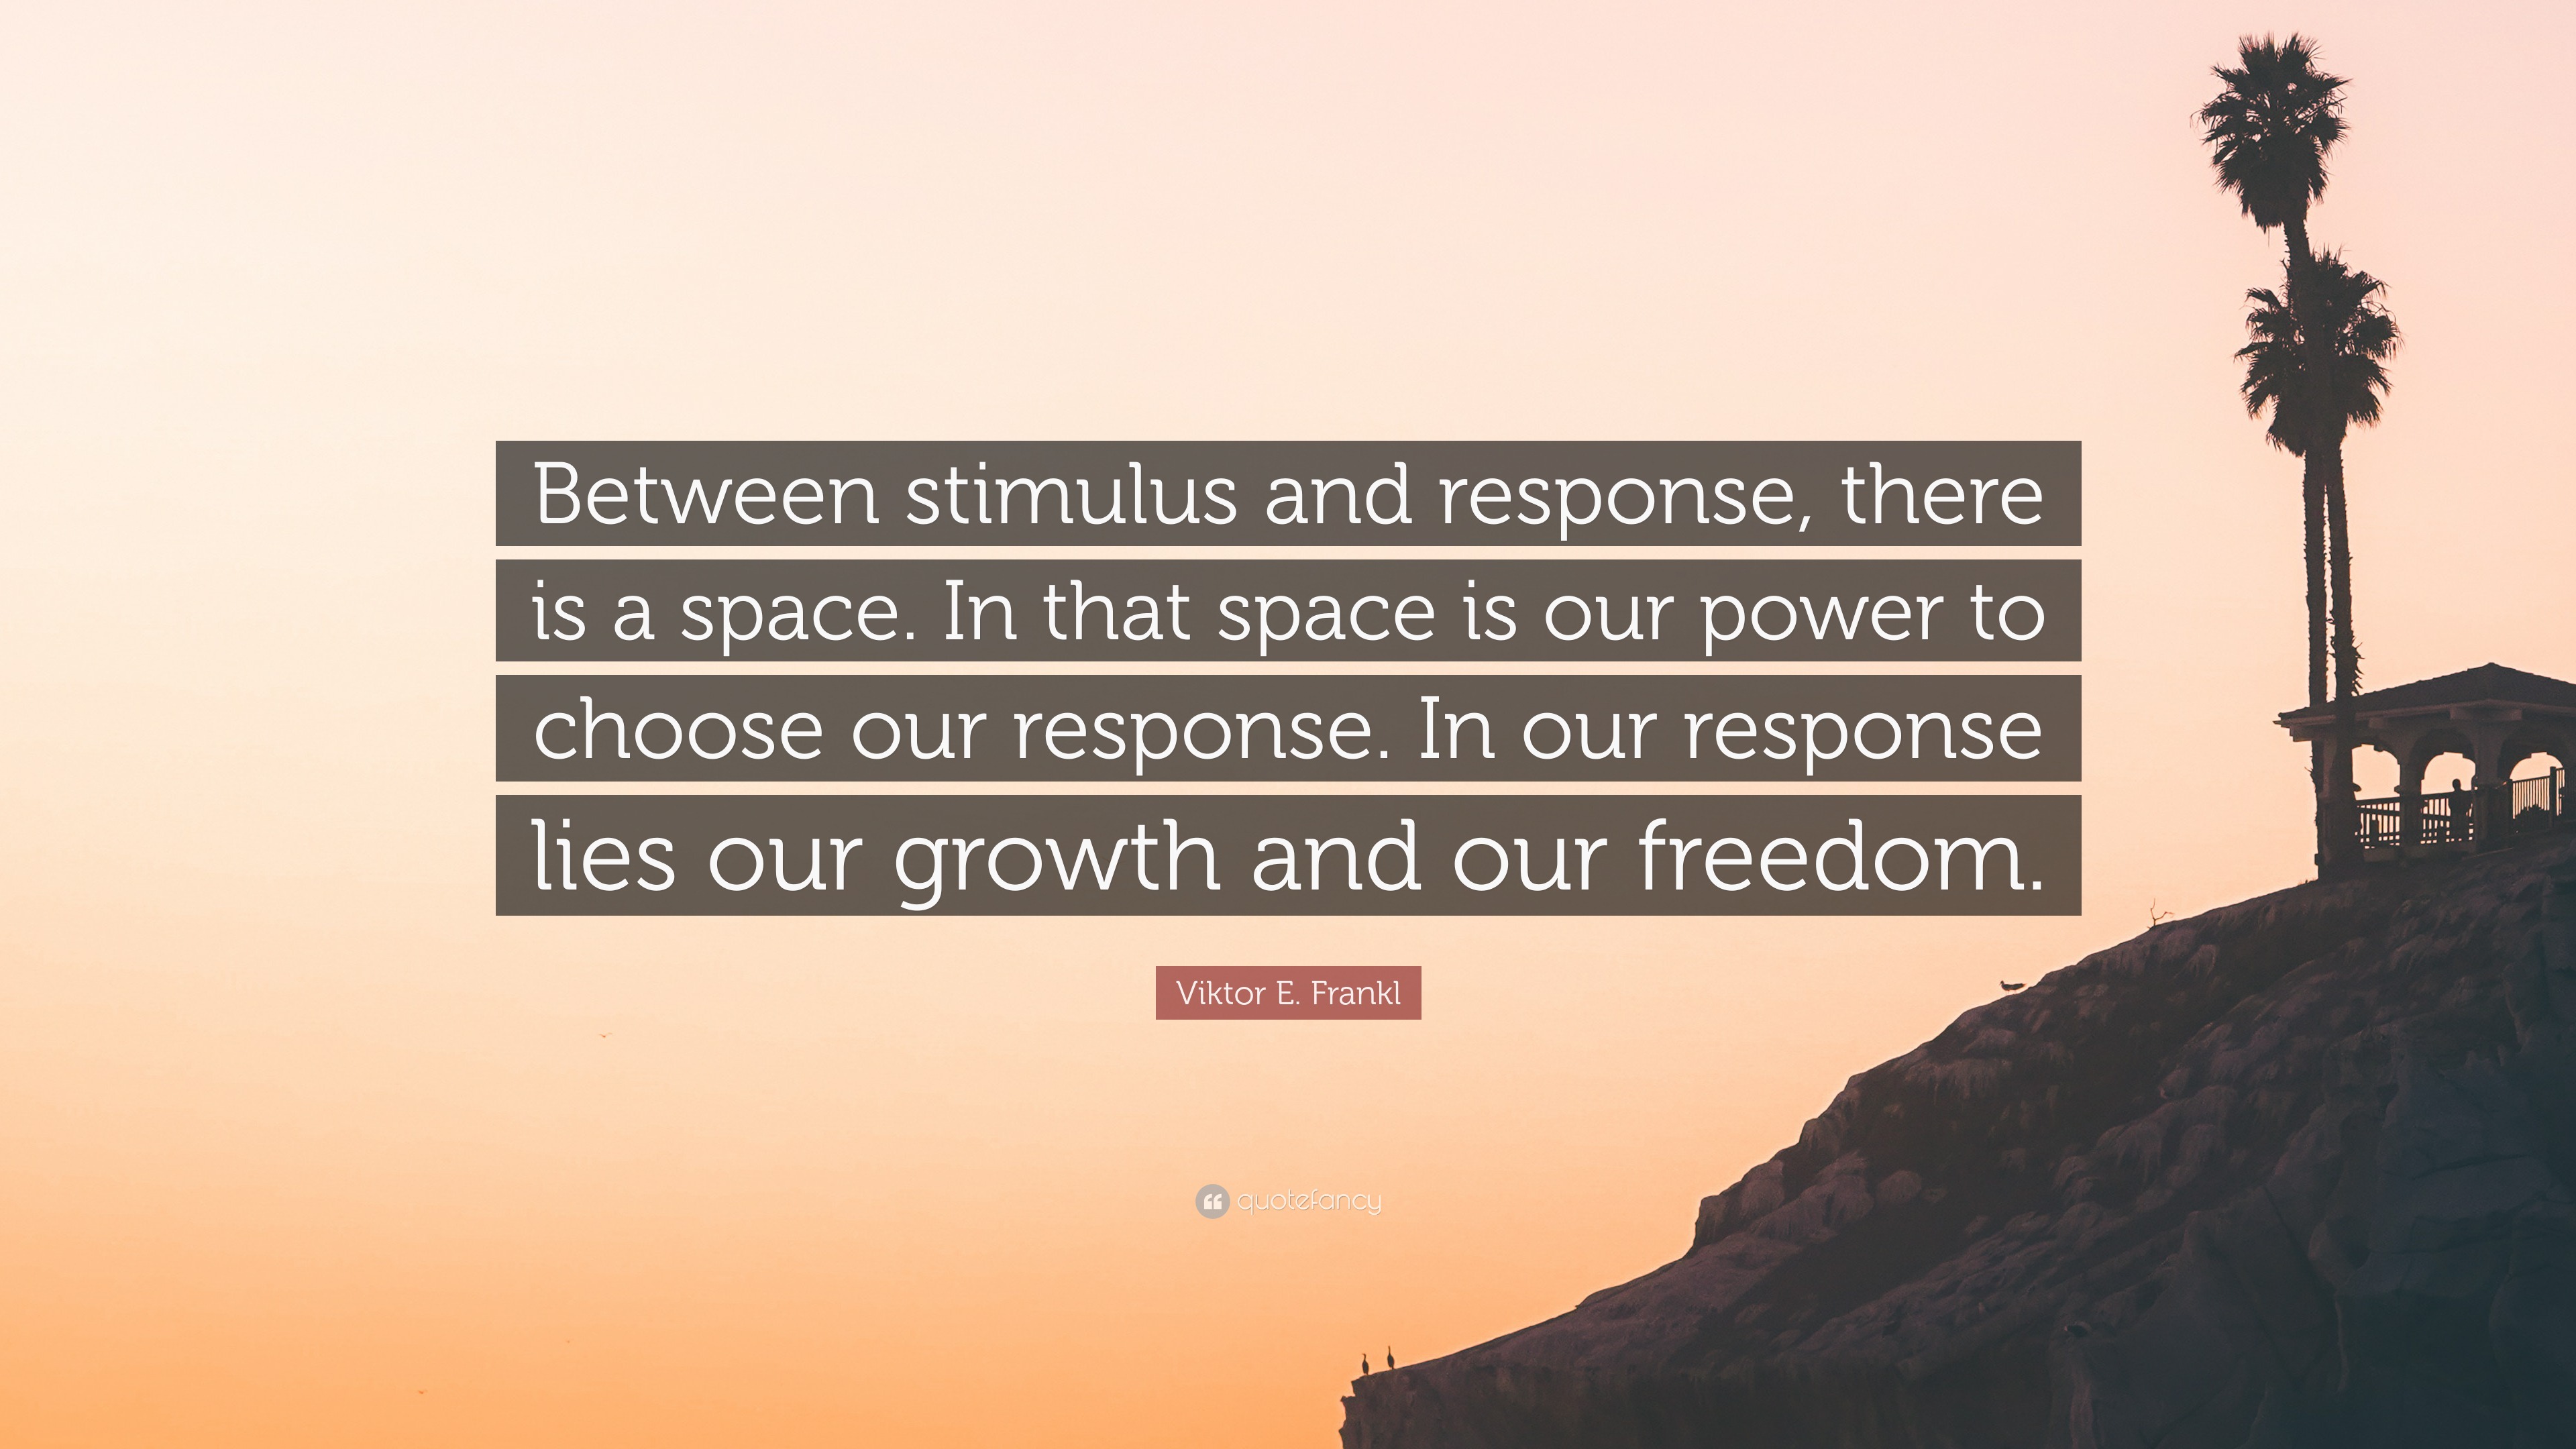 https://quotefancy.com/media/wallpaper/3840x2160/8012835-Viktor-E-Frankl-Quote-Between-stimulus-and-response-there-is-a.jpg